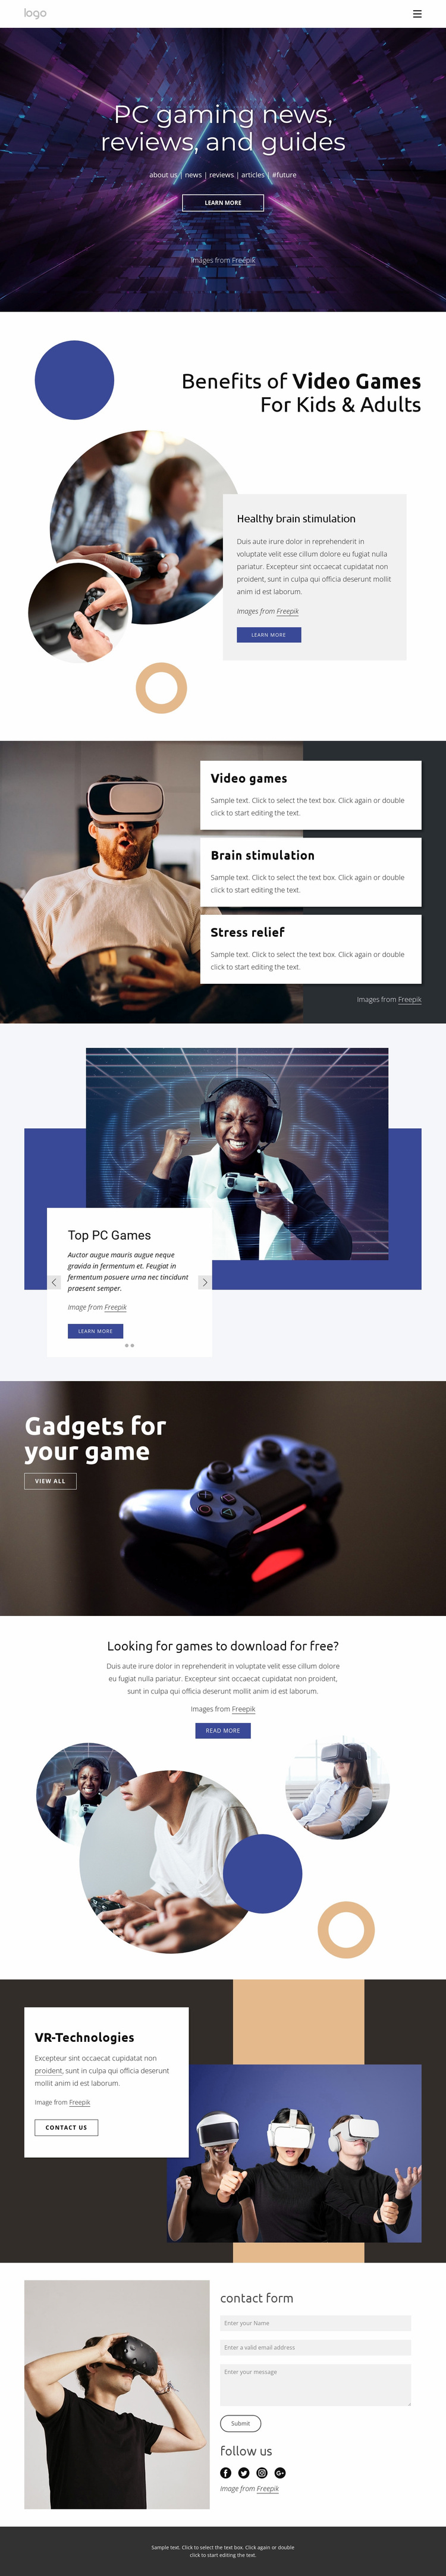 PC gaming news Website Builder Templates